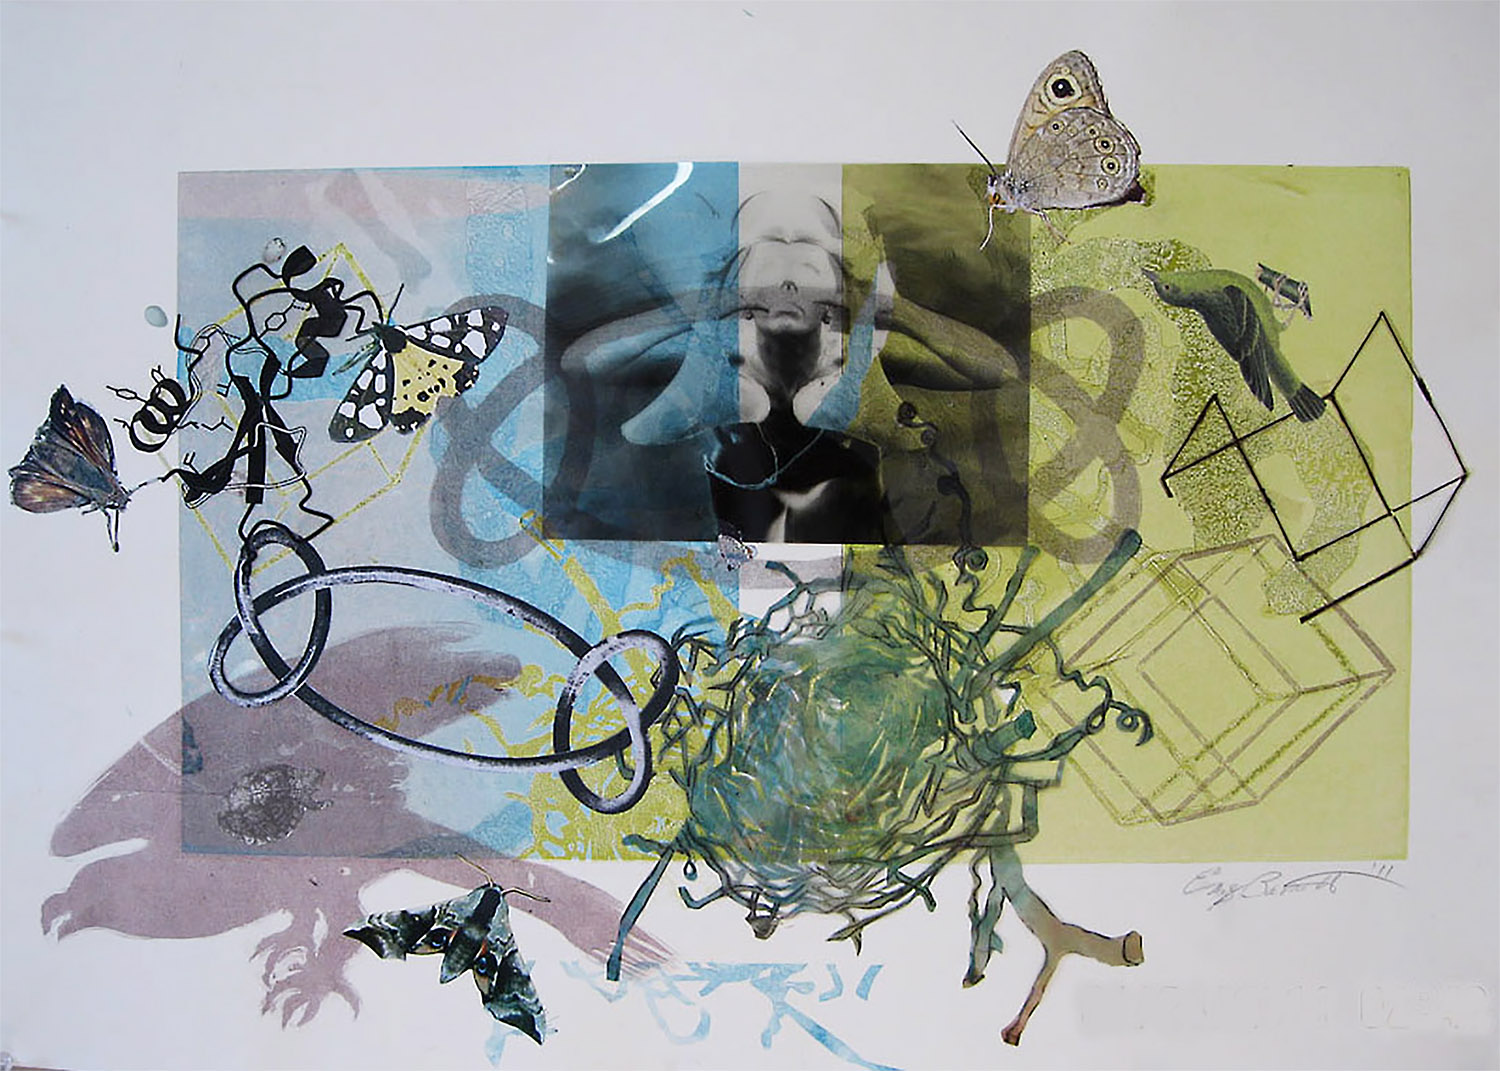  NestKnot 1, 2014, Silkscreen with Collage Elements, 22 x 30 